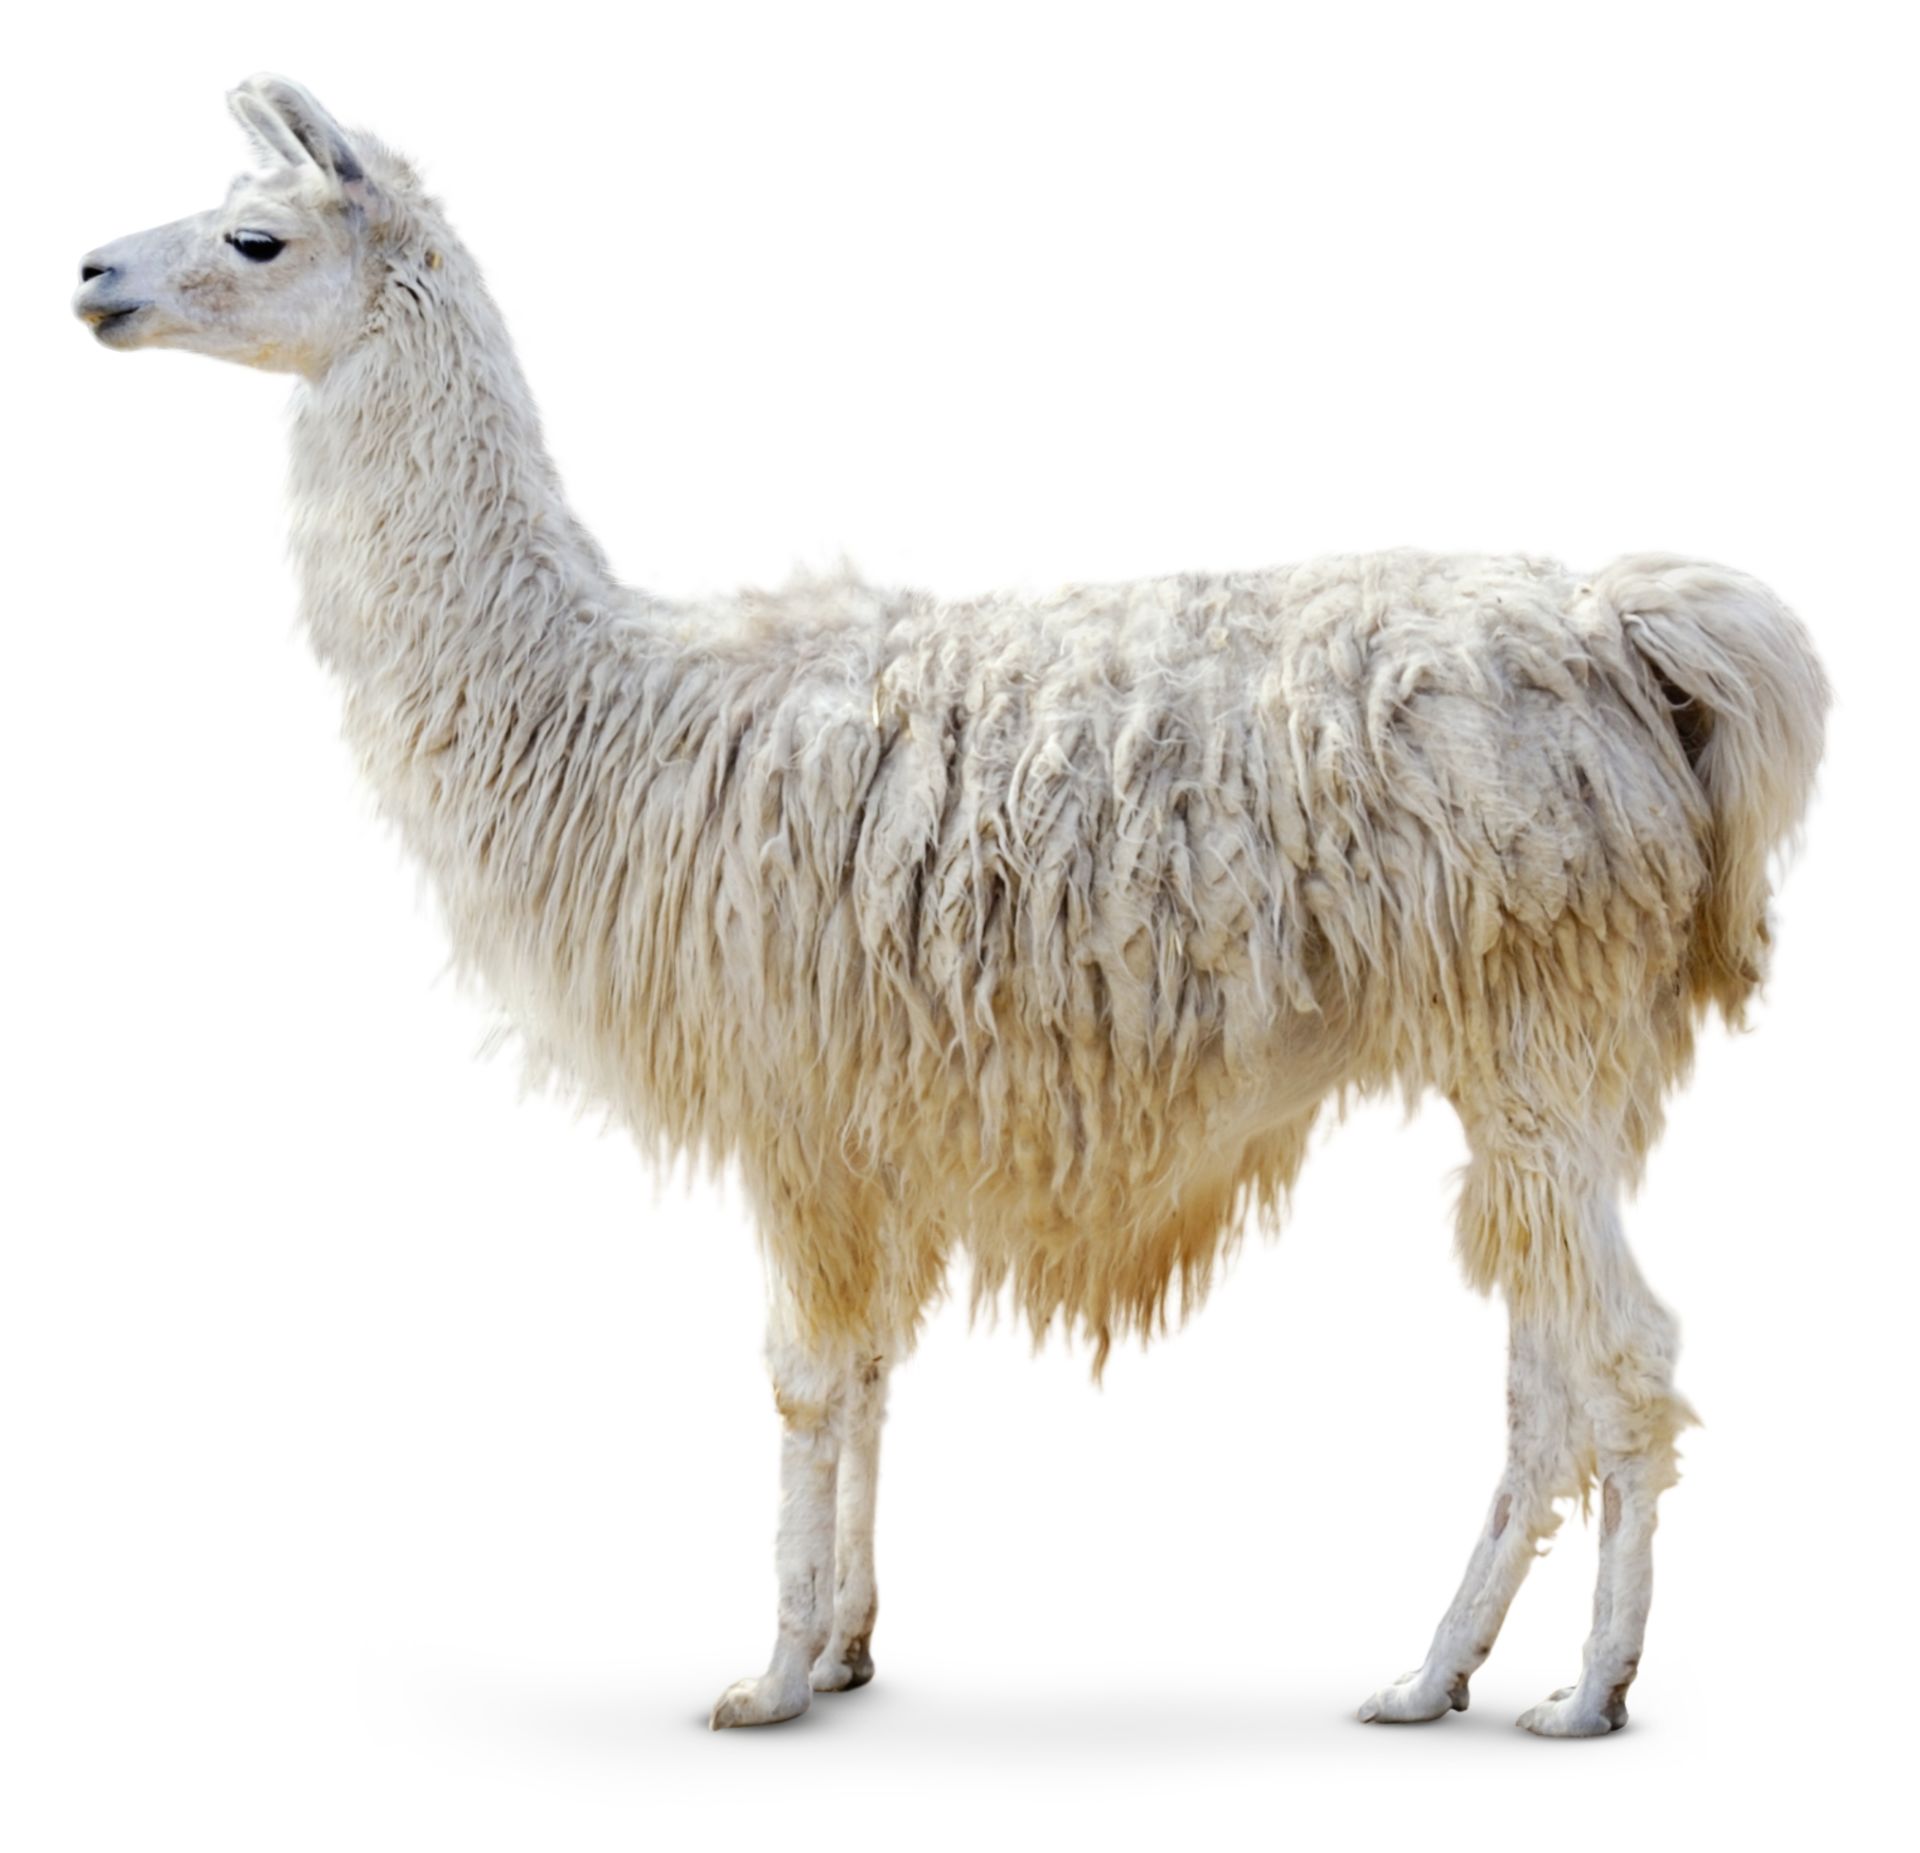 What Is A Llama? | Fun Facts About Llamas | DK Find Out